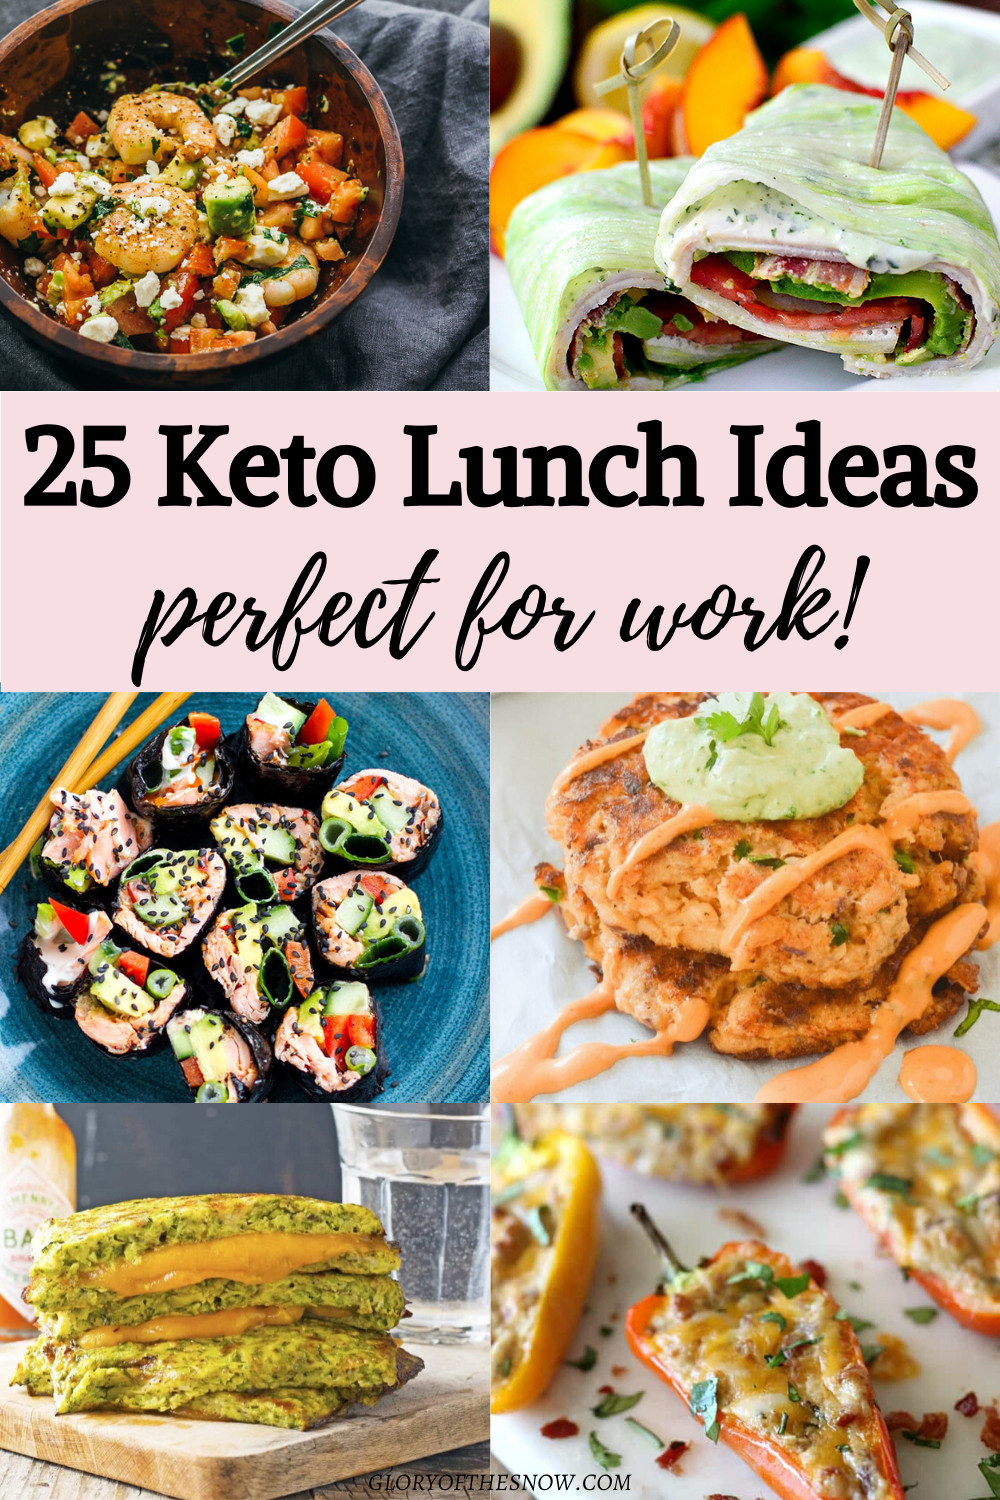 Vegetarian Keto Lunches For Work
 Keto Lunch Ideas 25 Easy Low Carb Recipes That You Can